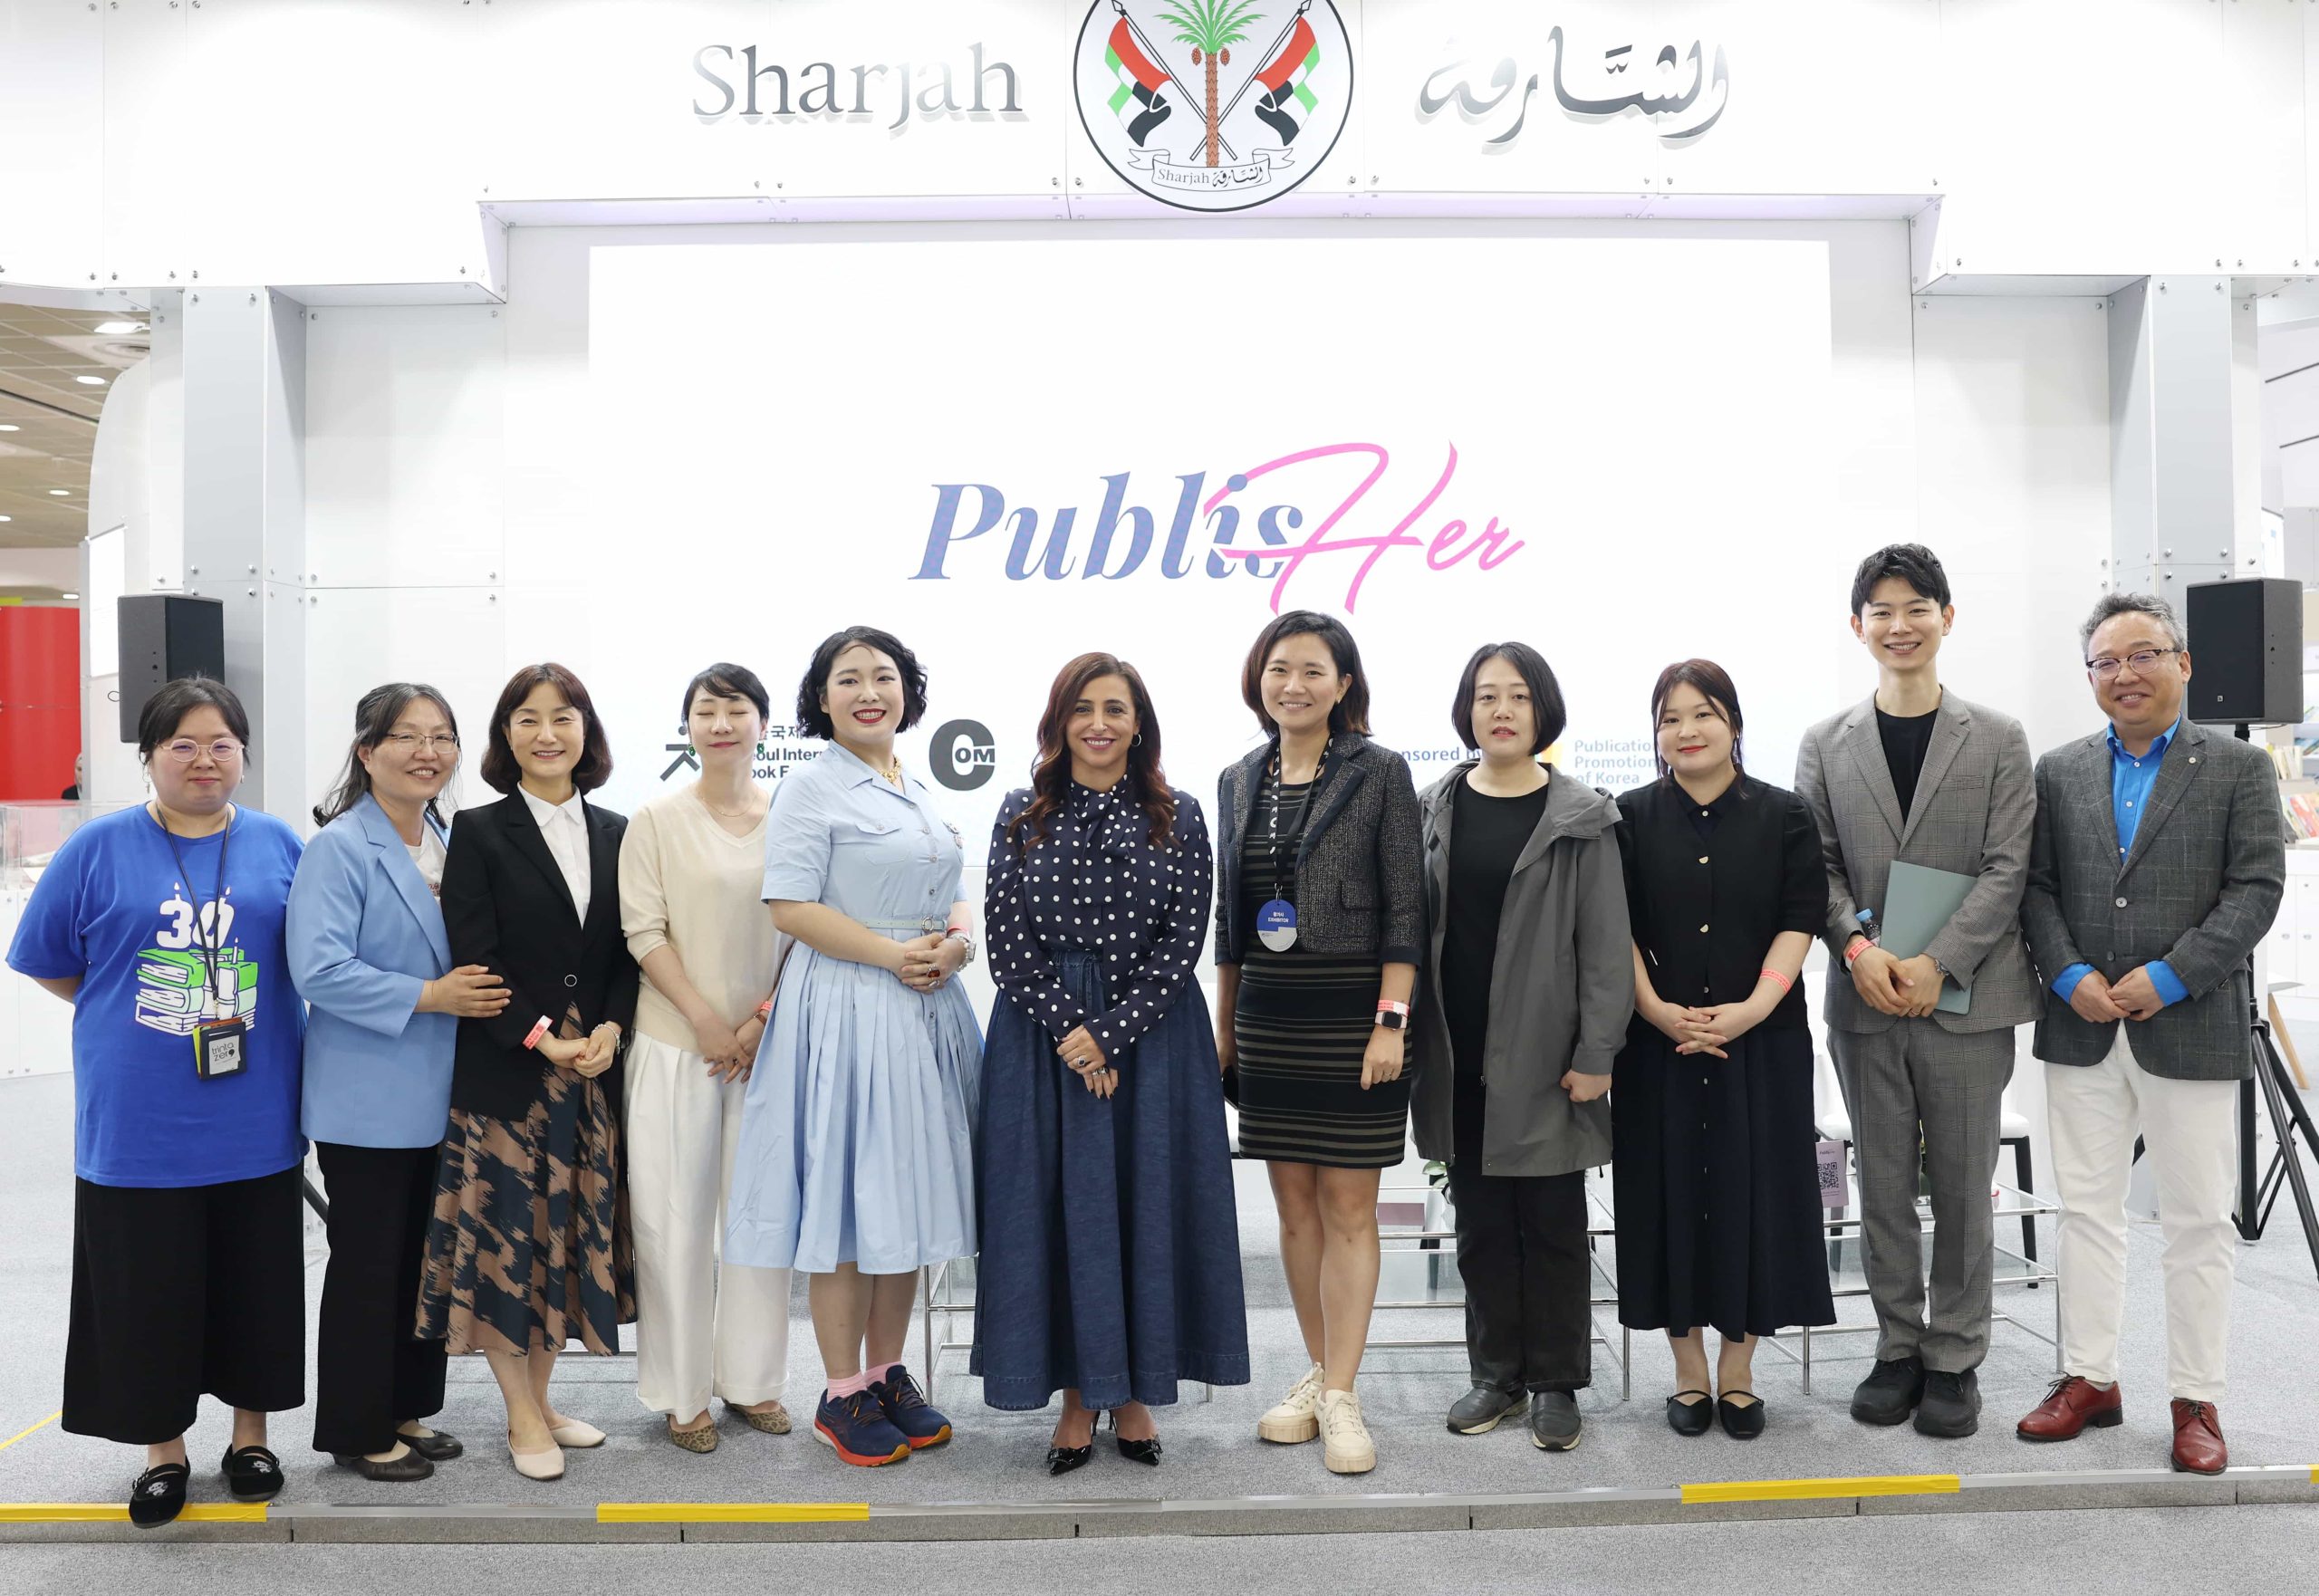 Bodour Al Qasimi launches PublisHer Excellence Awards  in recognition of exceptional female publishers